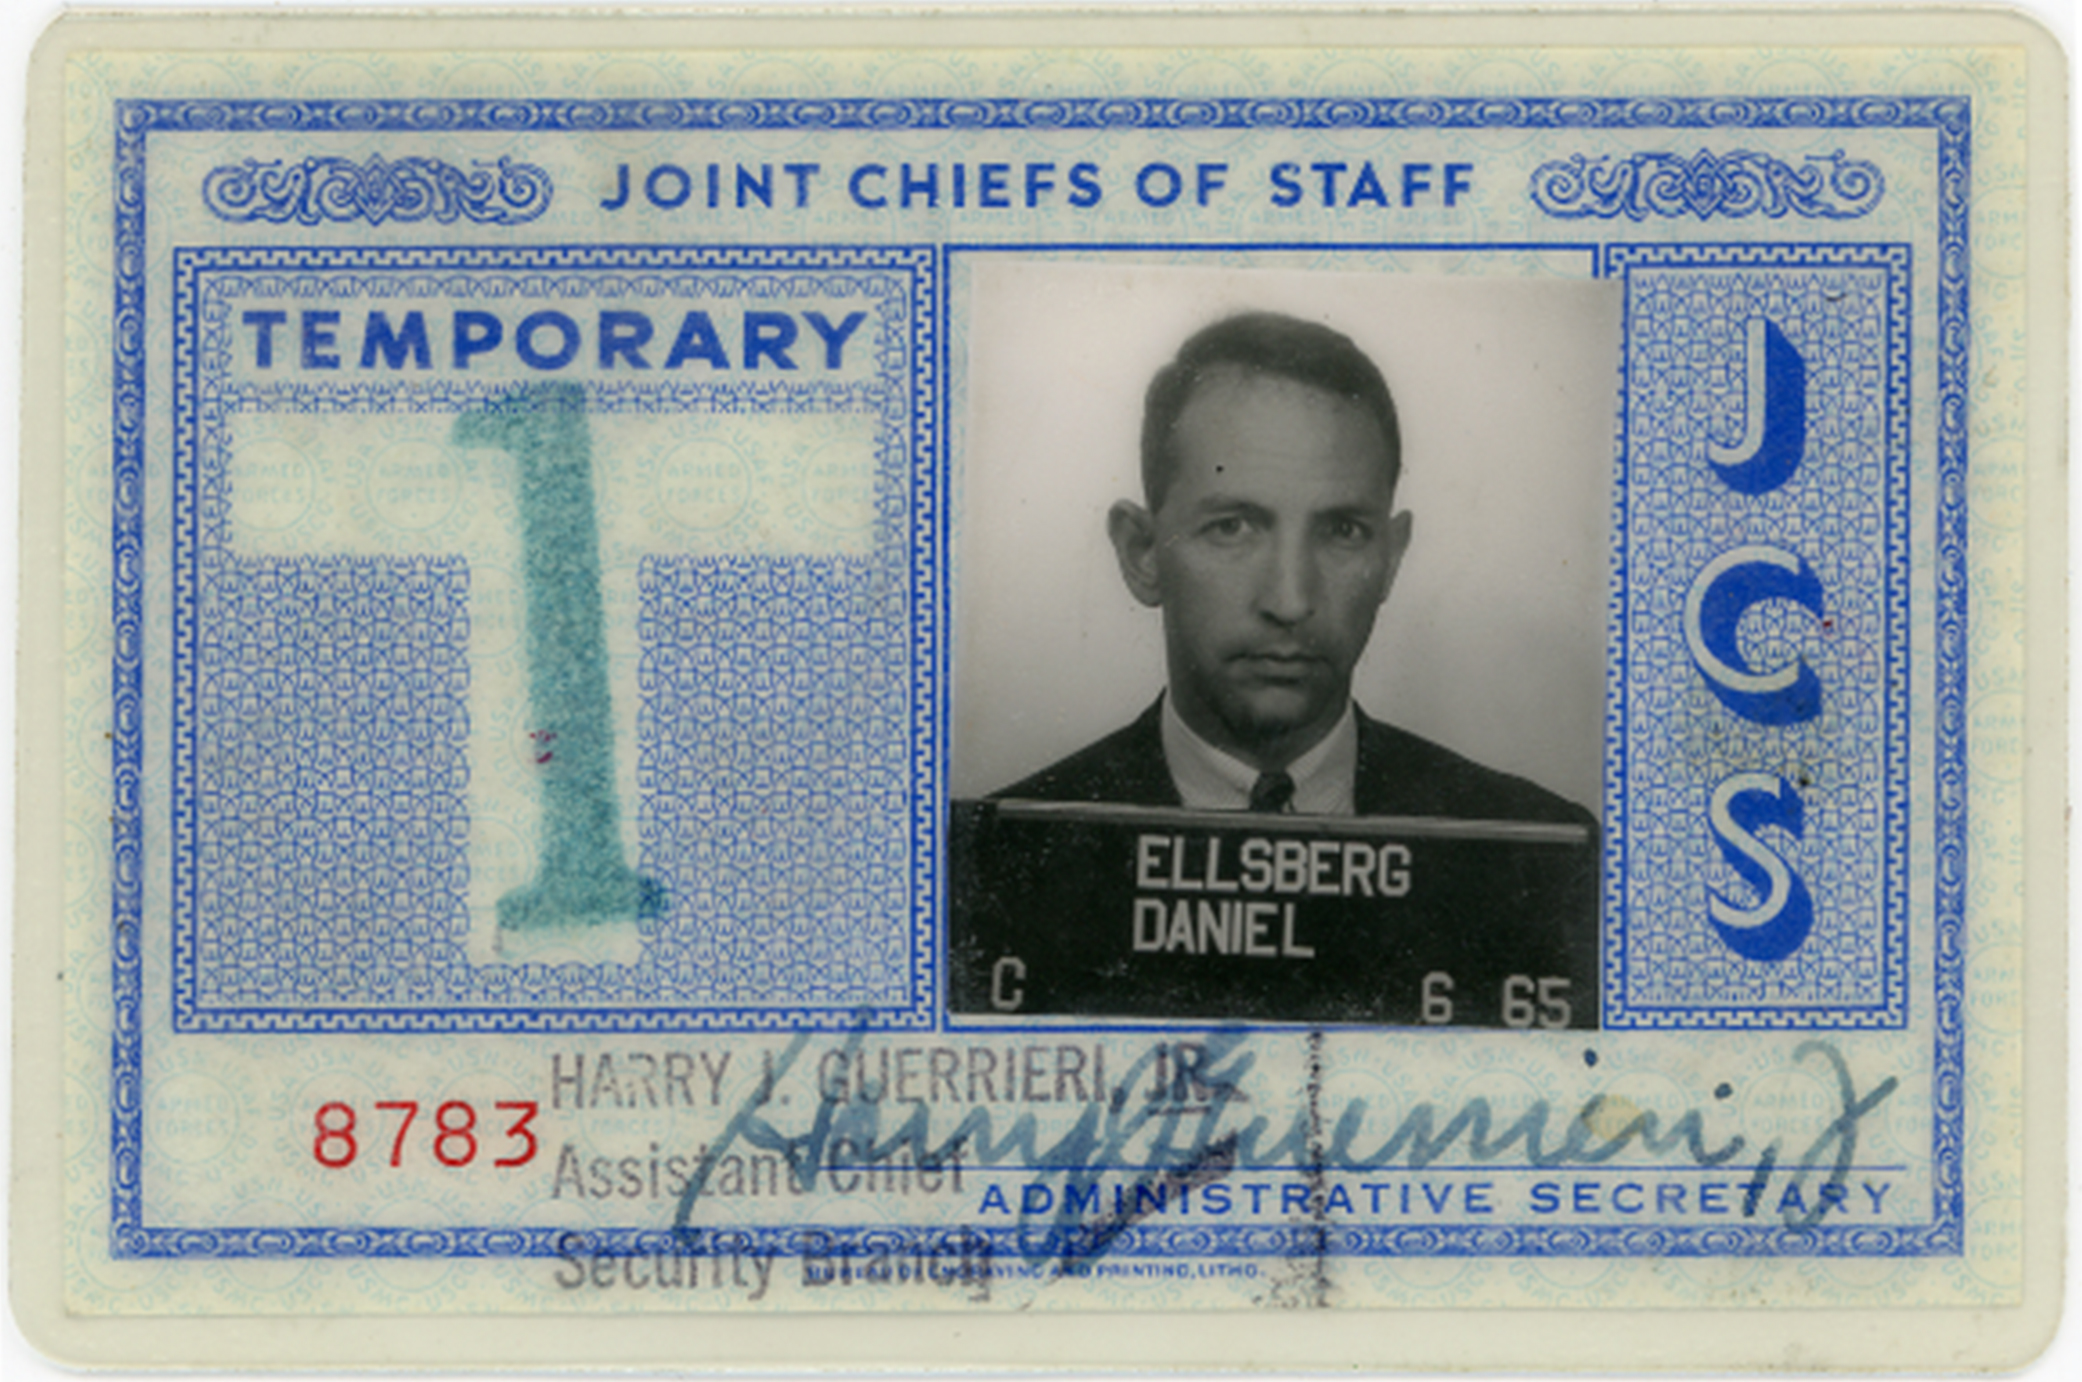 Ellsberg's Joint Chiefs of Staff temporary ID card, 1965. 

Courtesy Daniel Ellsberg Papers, Robert S. Cox Special Collections and University Archives Research Center, UMass Amherst Libraries.